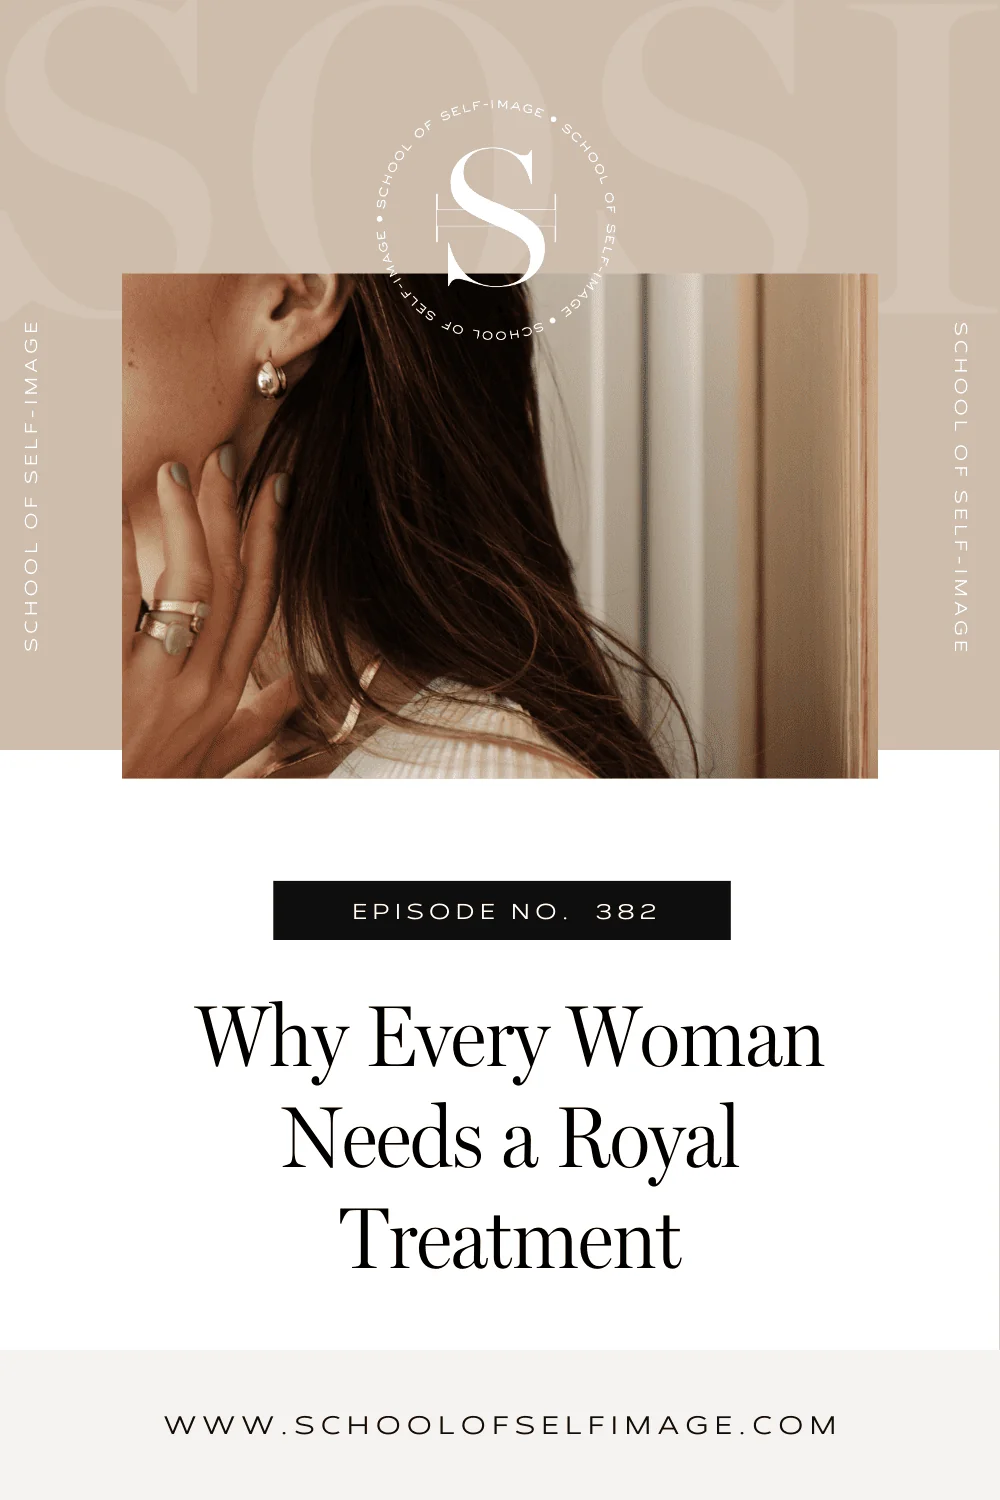 Why Every Woman Needs a Royal Treatment